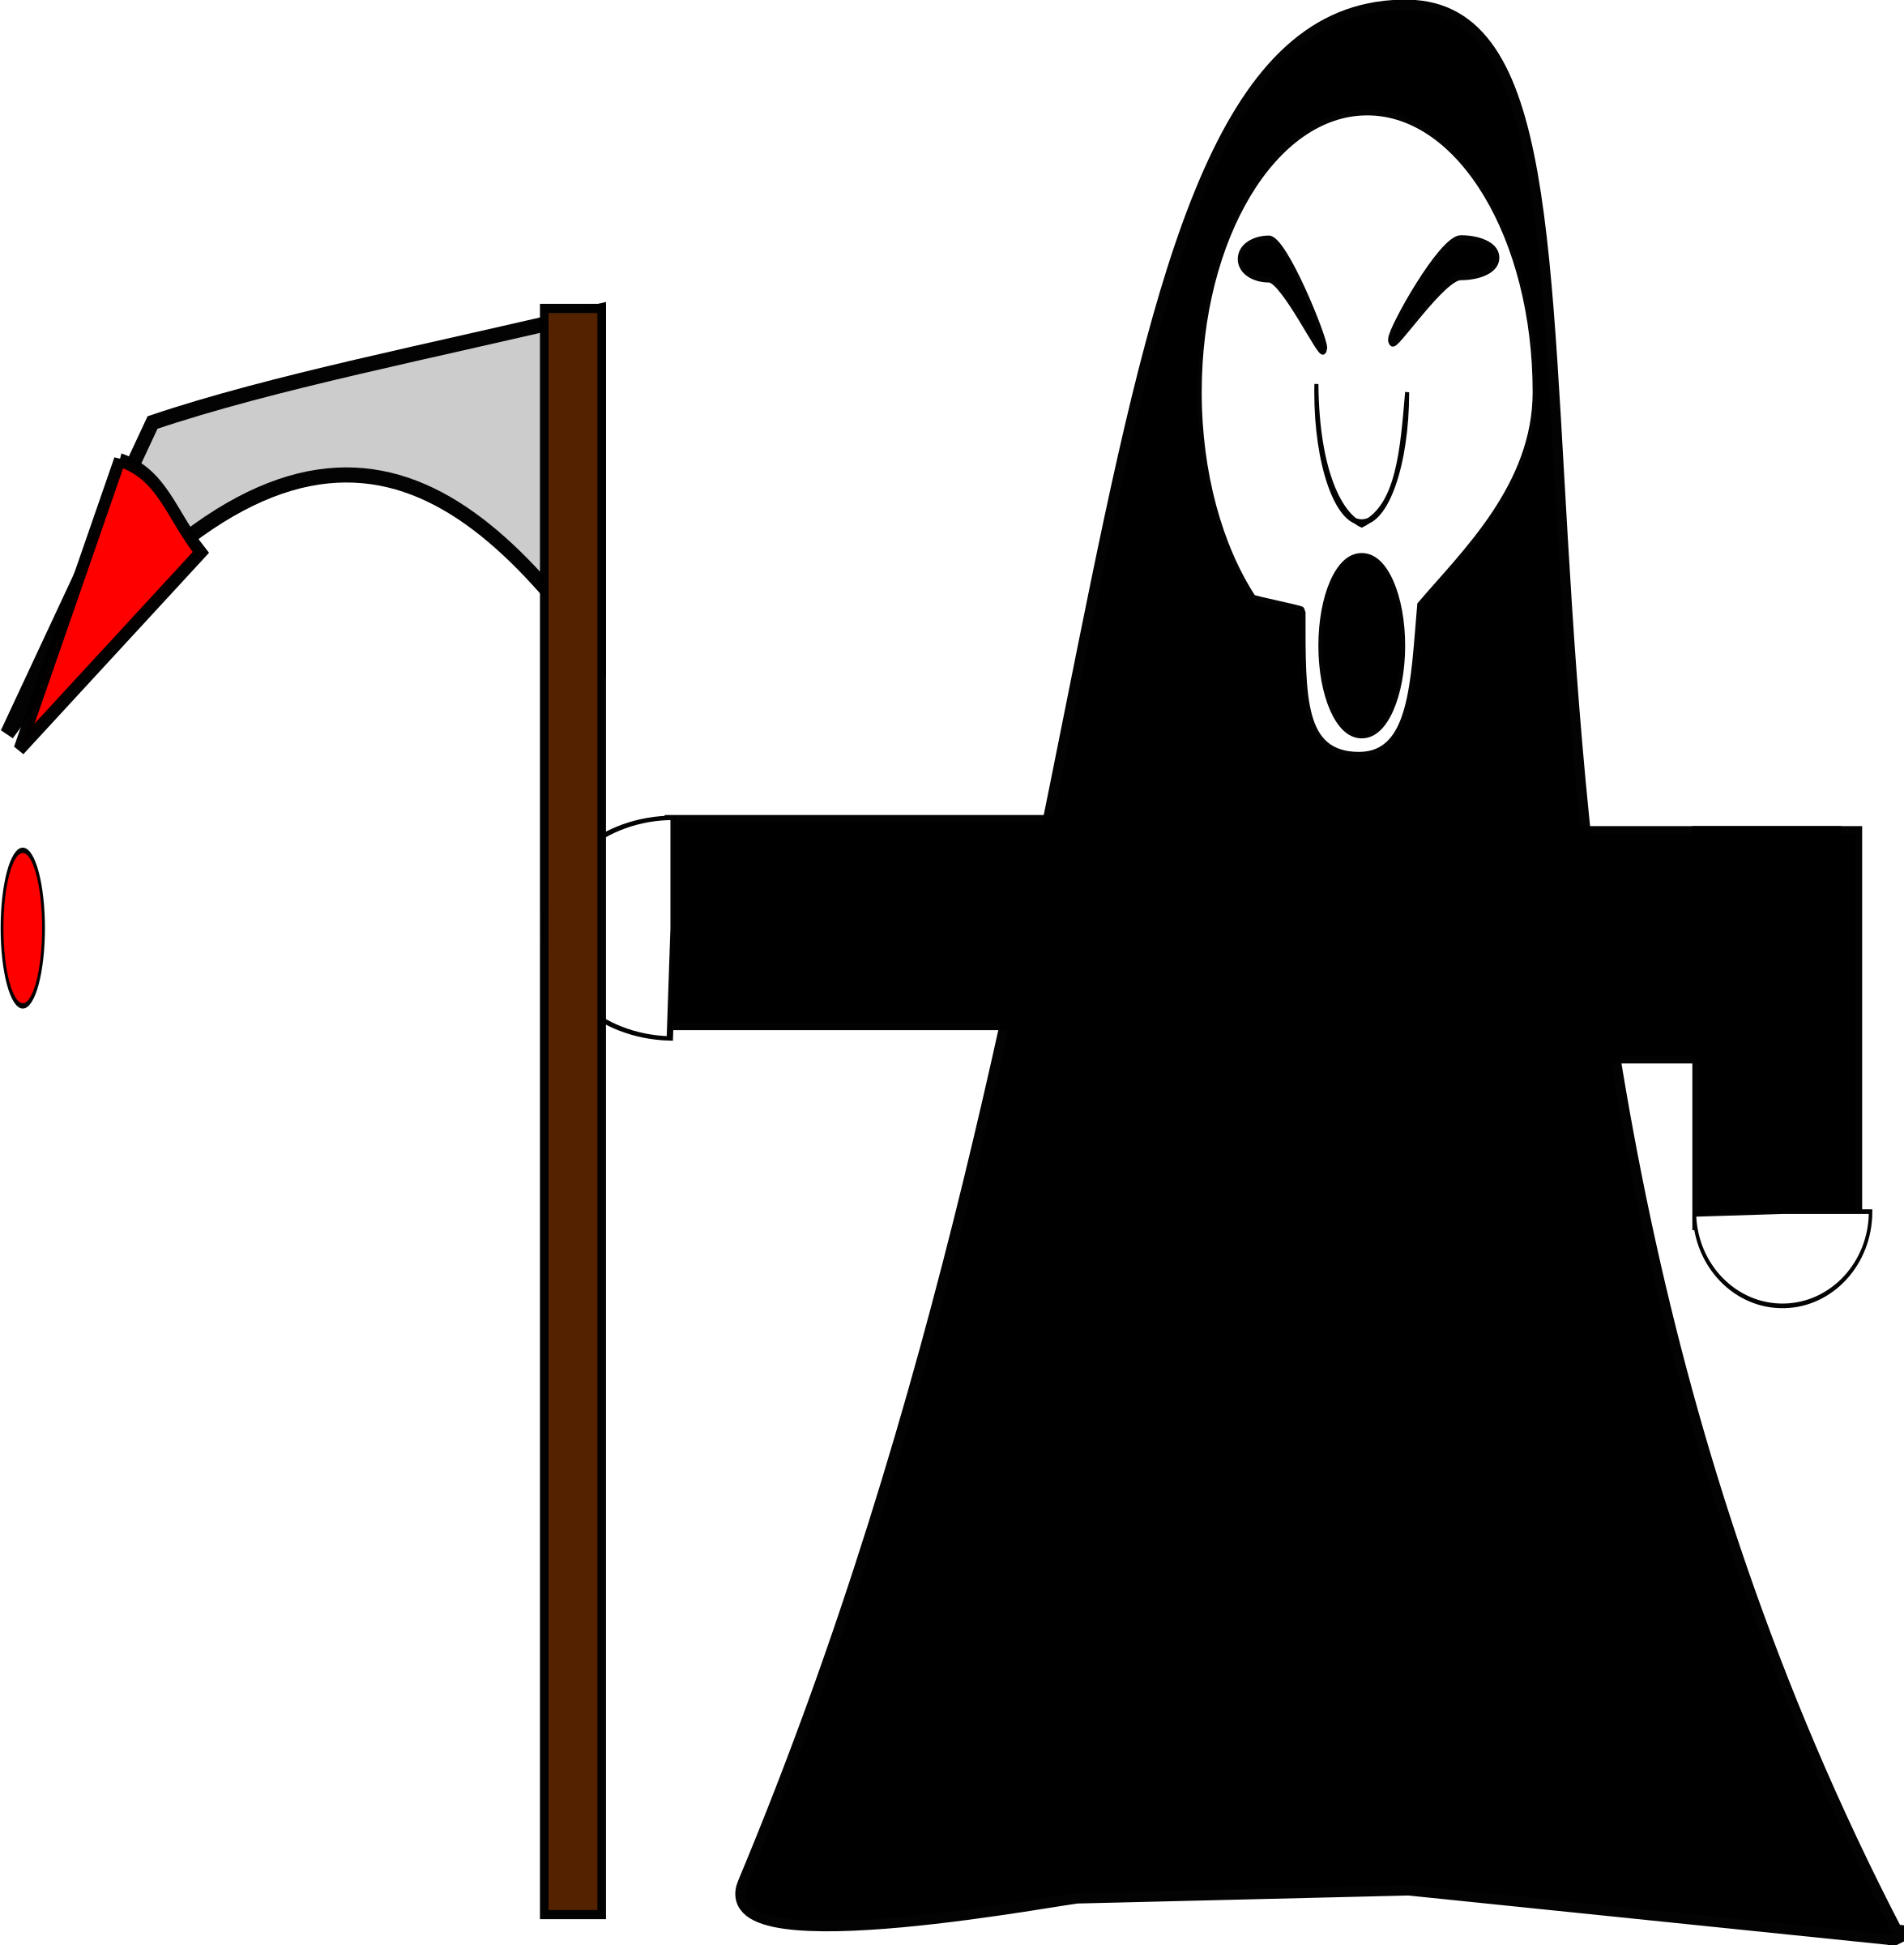 free clipart images grim reaper - photo #21